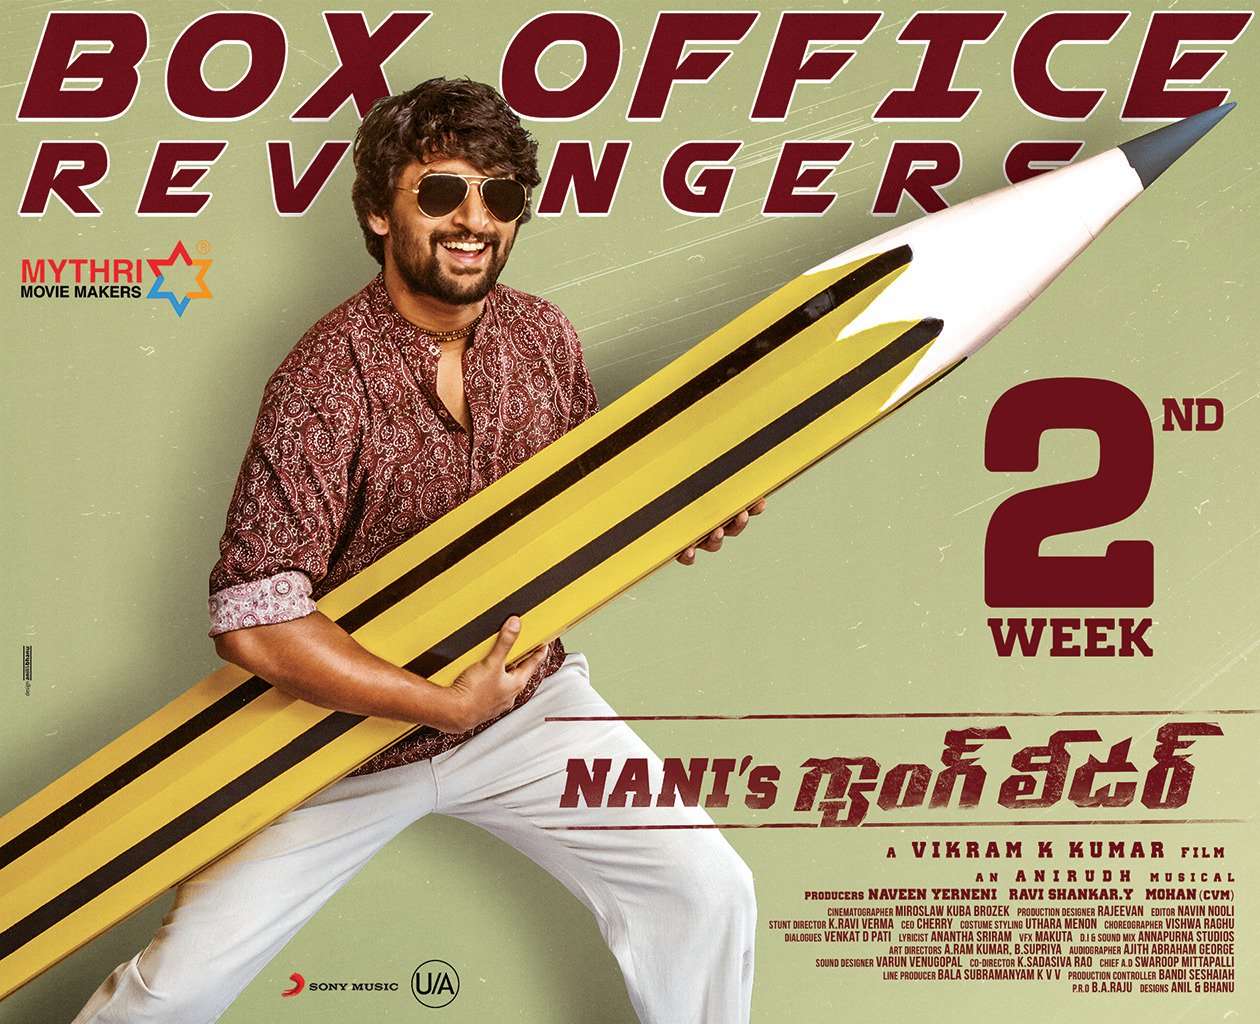 Gang Leader 1st Week Worldwide Collections